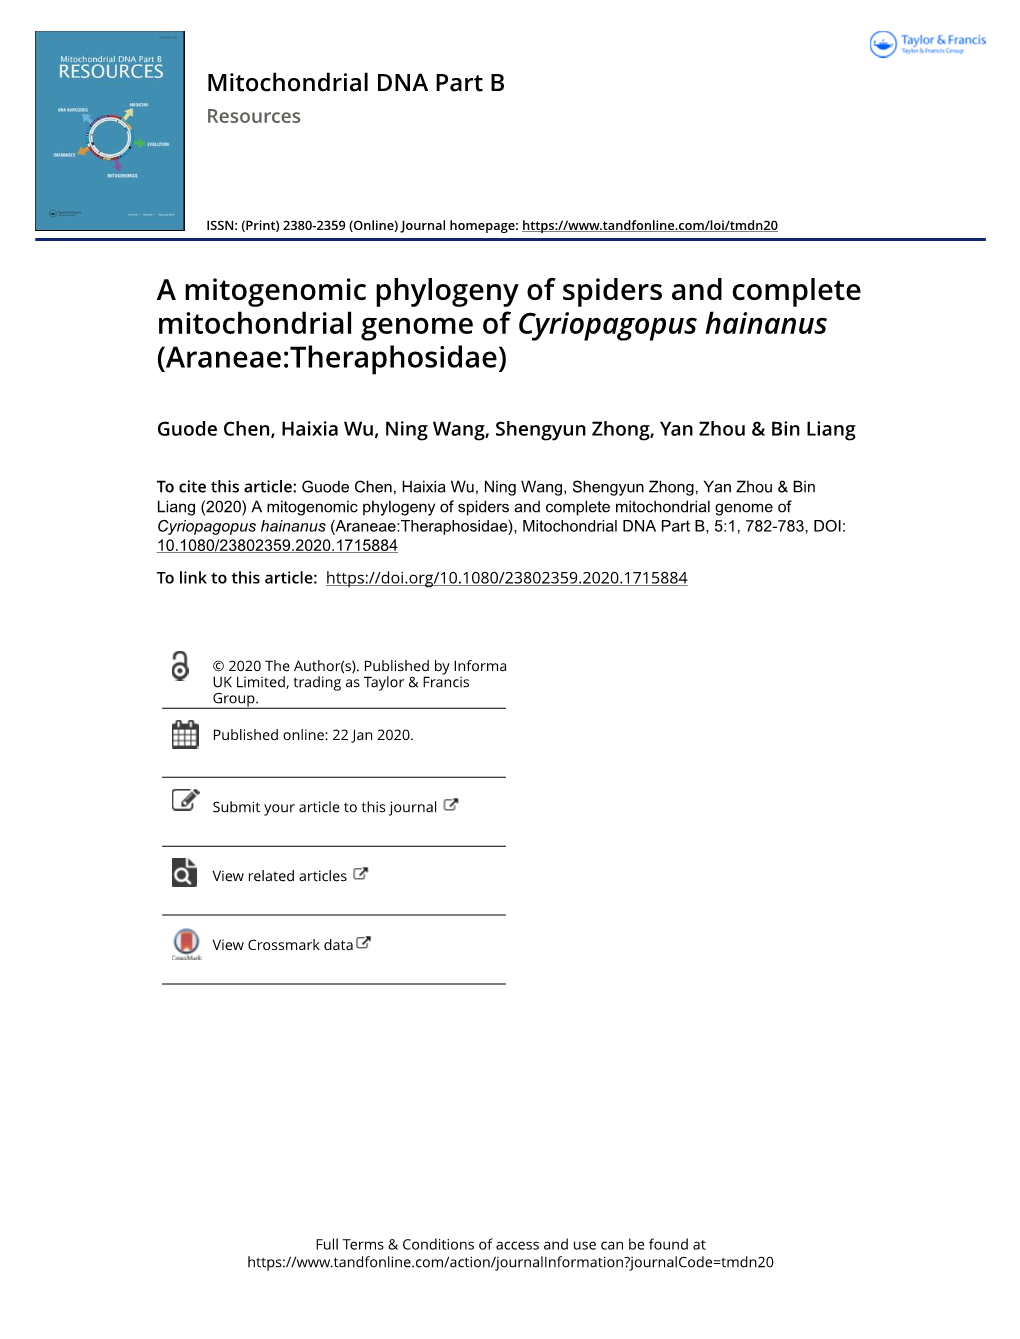 A Mitogenomic Phylogeny of Spiders and Complete Mitochondrial Genome of Cyriopagopus Hainanus (Araneae:Theraphosidae)